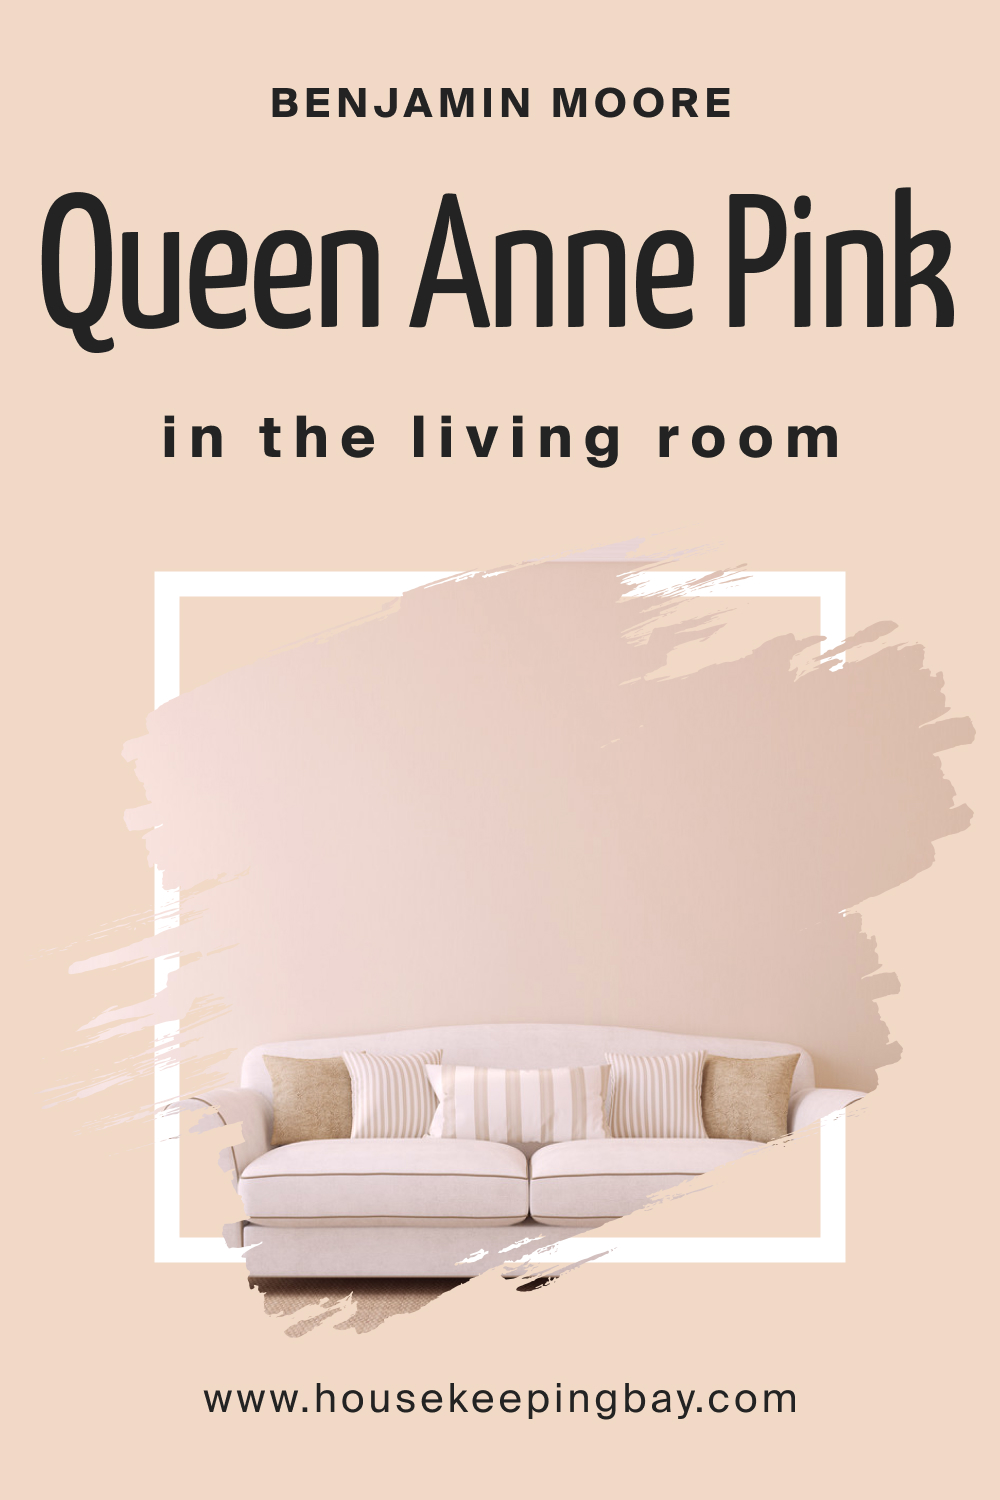 How to Use Queen Anne Pink HC-60 in the Living Room?